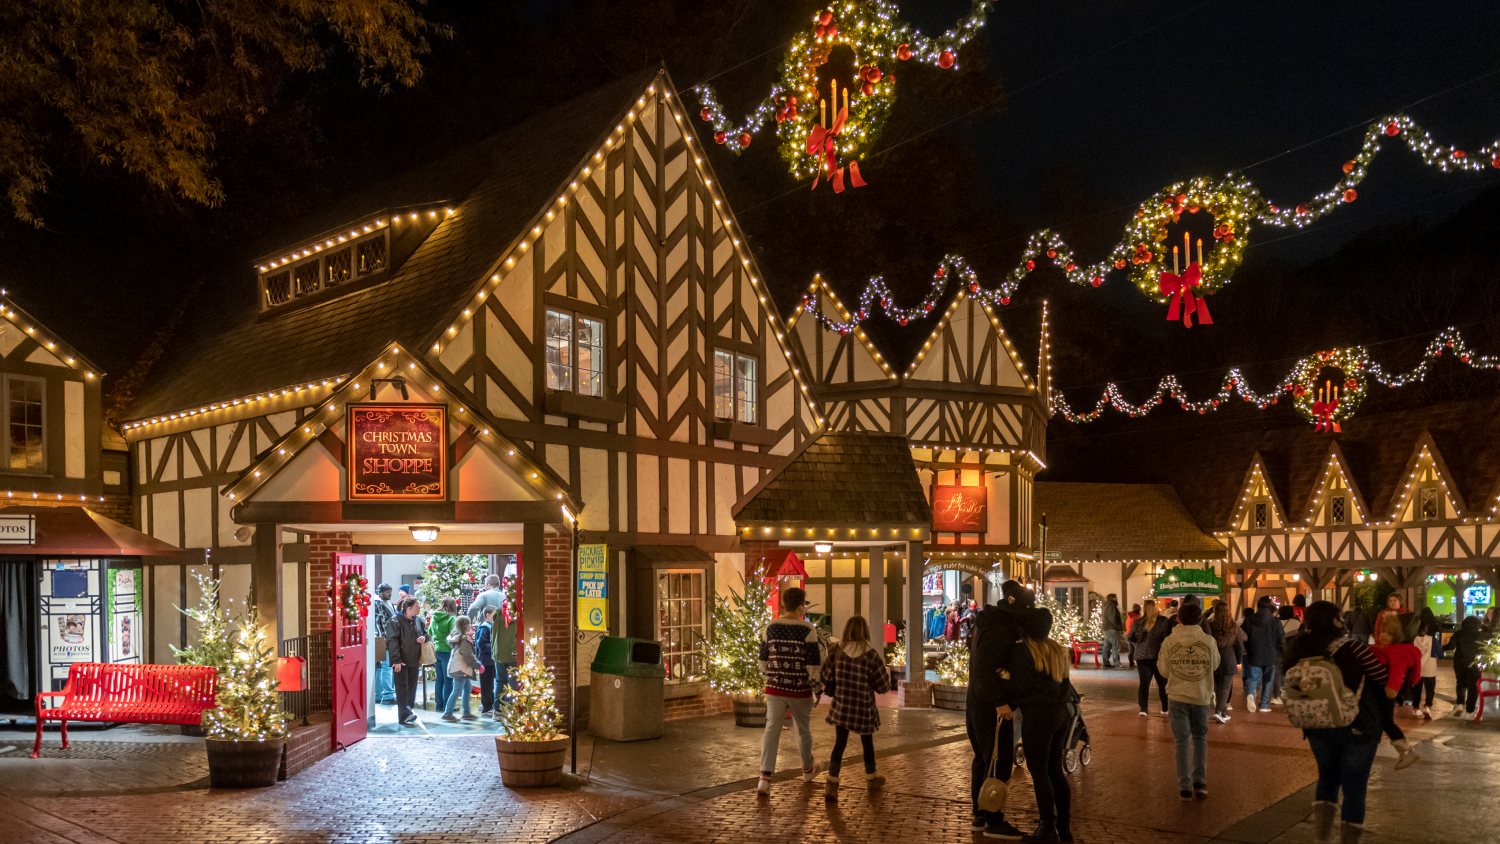 The World’s Most Beautiful Theme Park is once again transformed with over ten million twinkling lights at Busch Gardens Williamsburg Christmas Town.